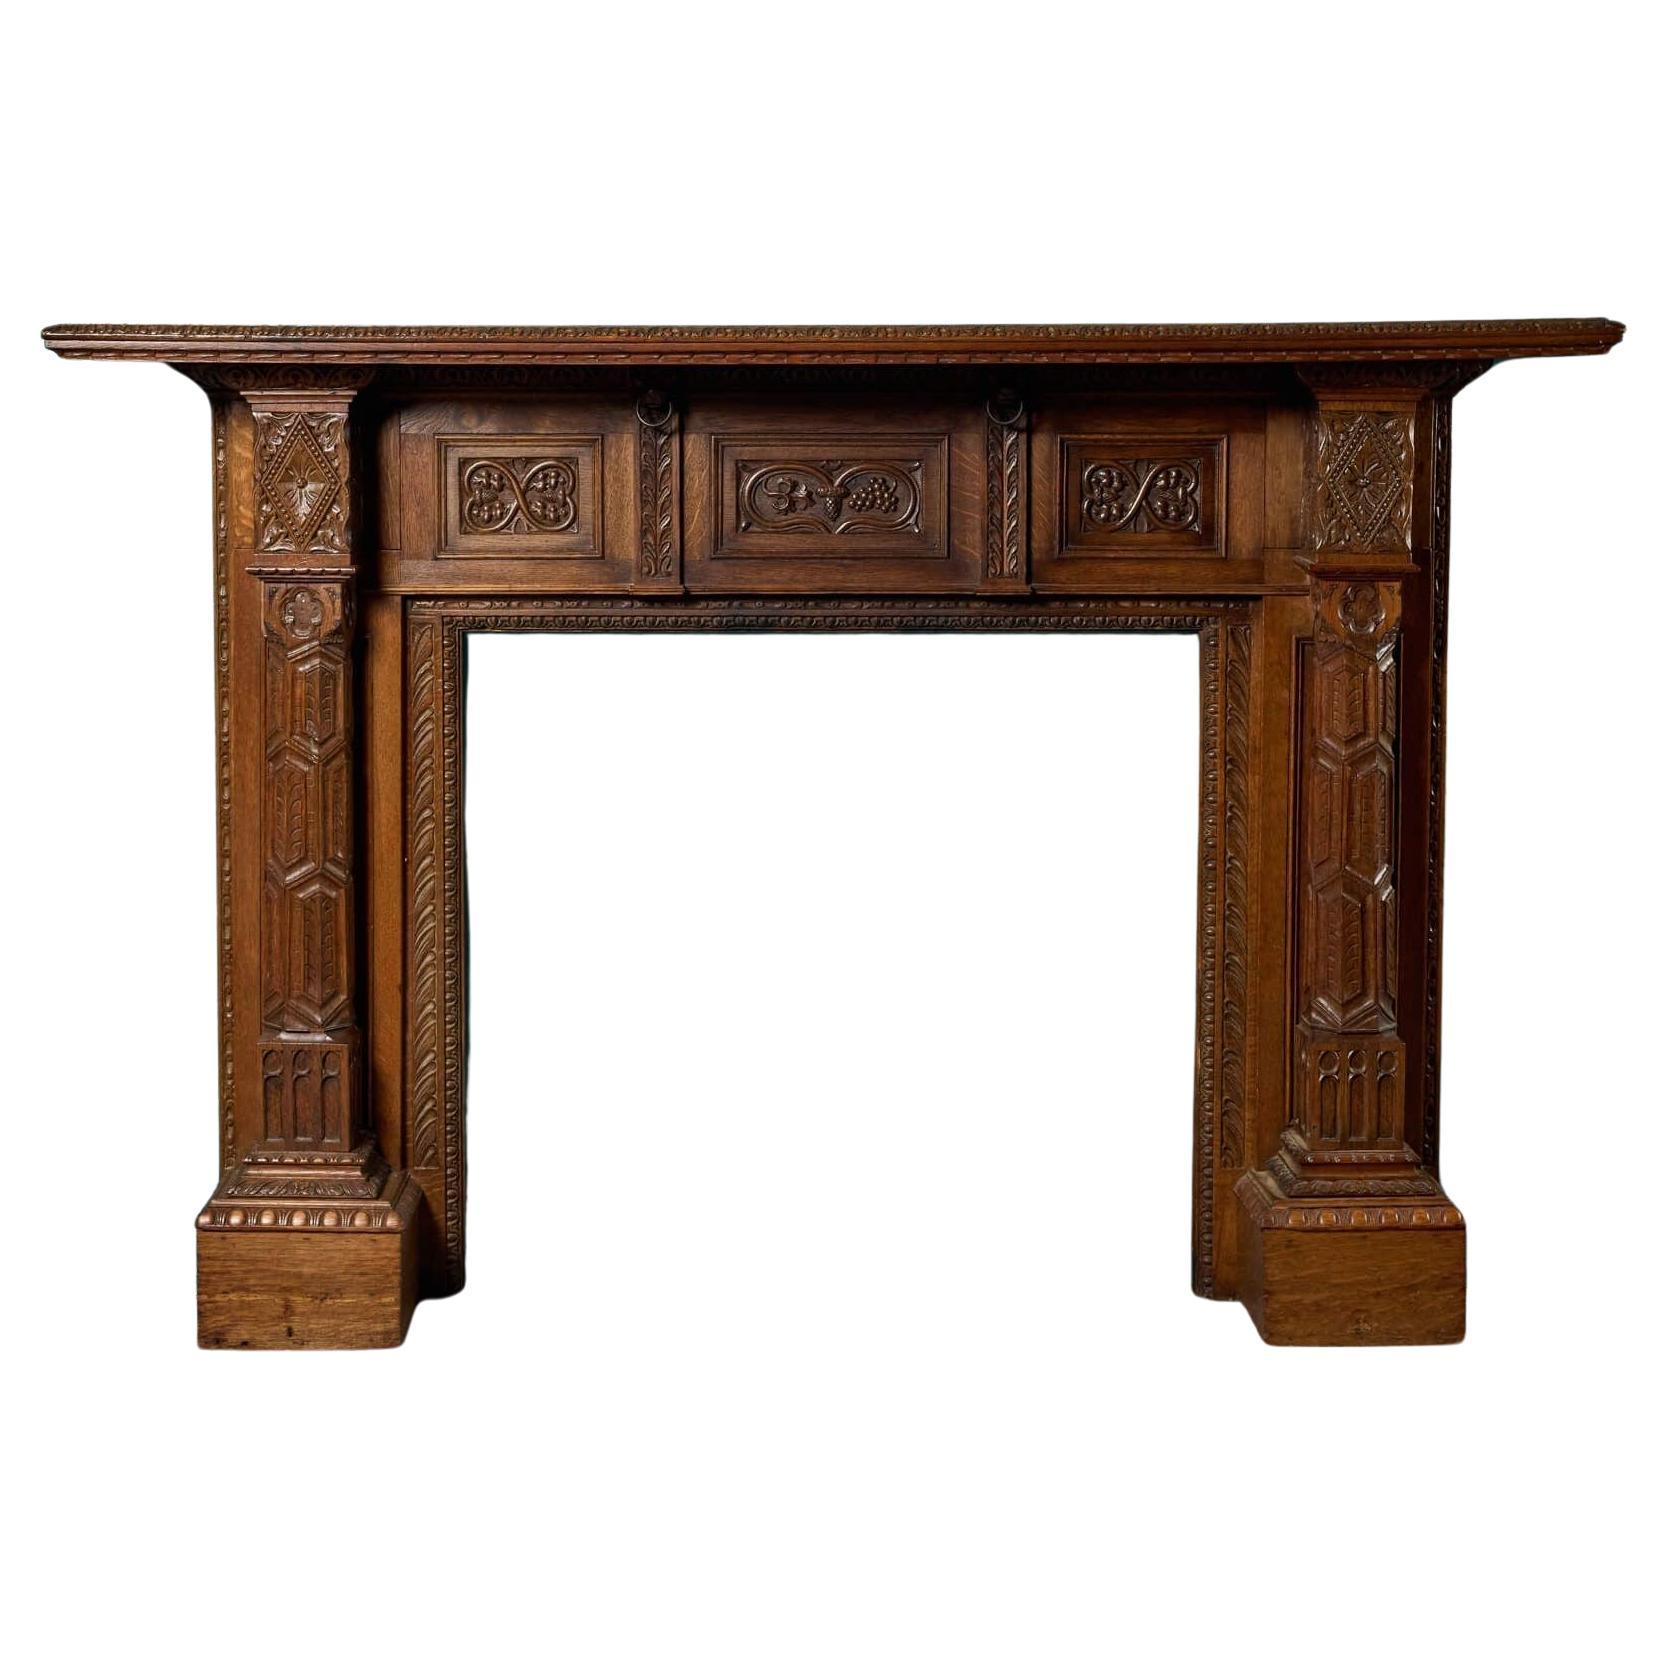 Antique Carved English Oak Fireplace For Sale